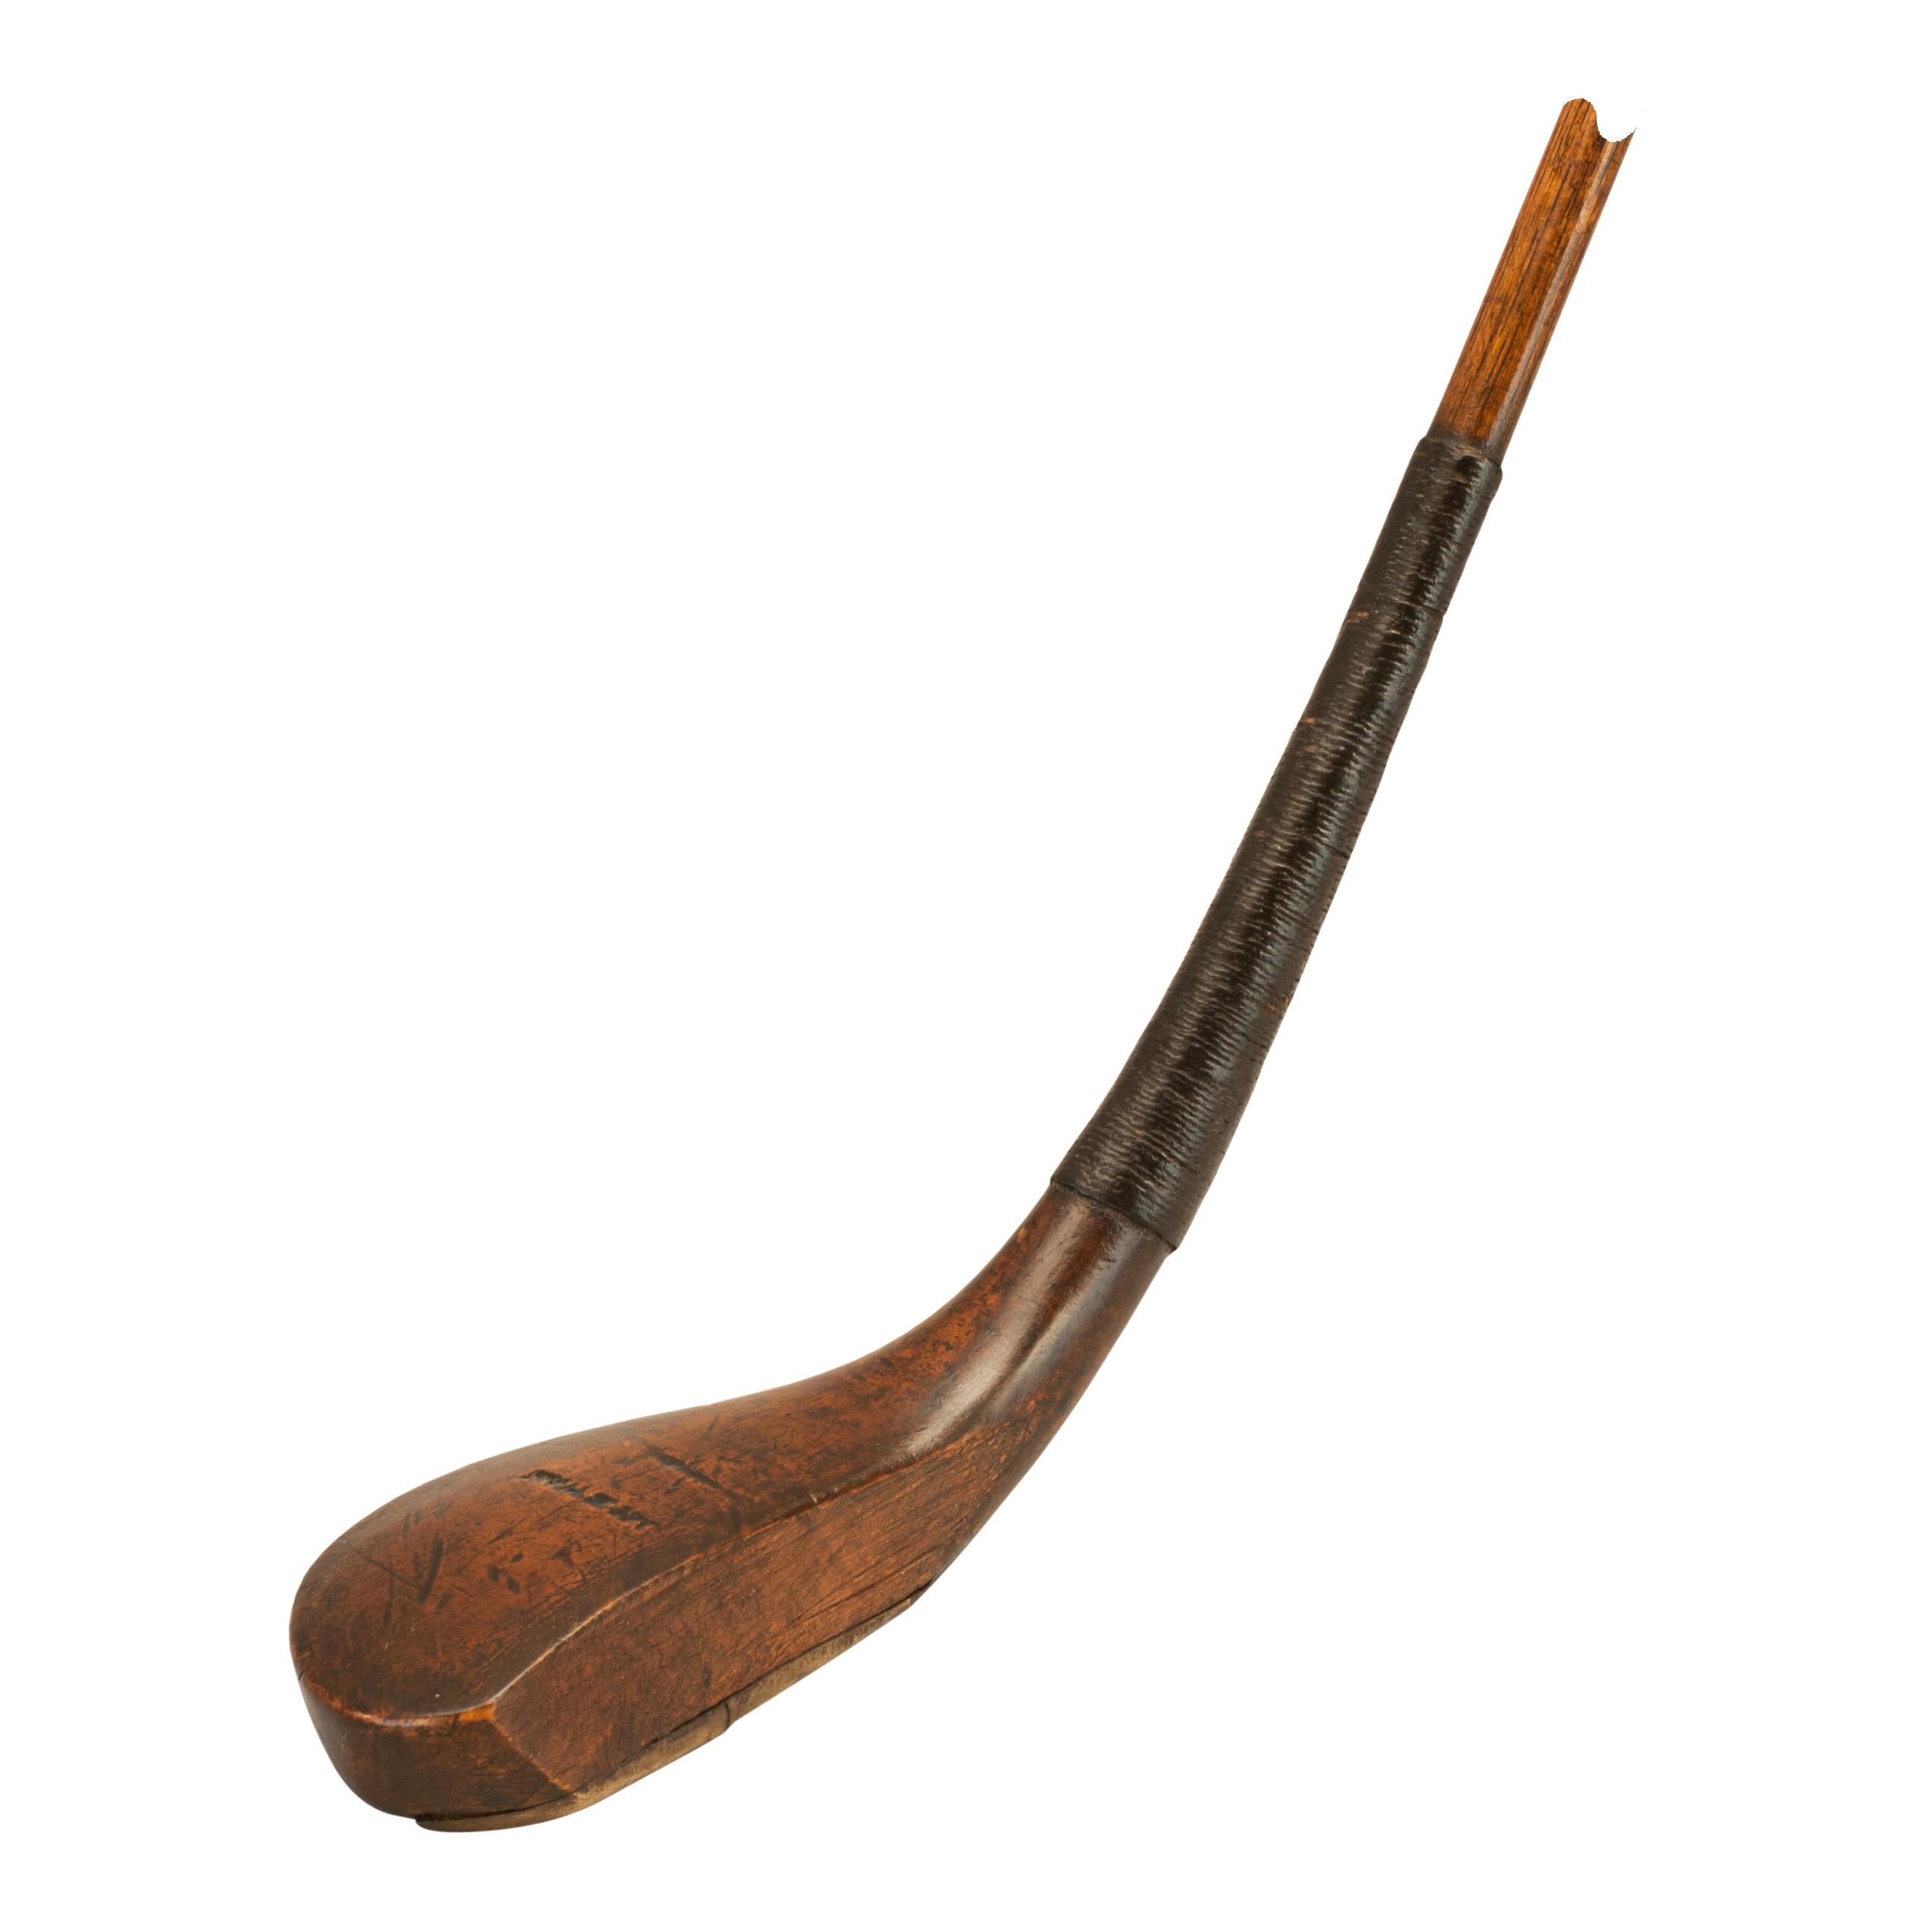 Long Nose Scared Head McEwan Play Club, Musselburgh.
An elegant, early scared head long nose play club by McEwan of Musselburgh. This play club has a wonderful and graceful shape, the likes found on early feather ball era clubs. It has a lead weight